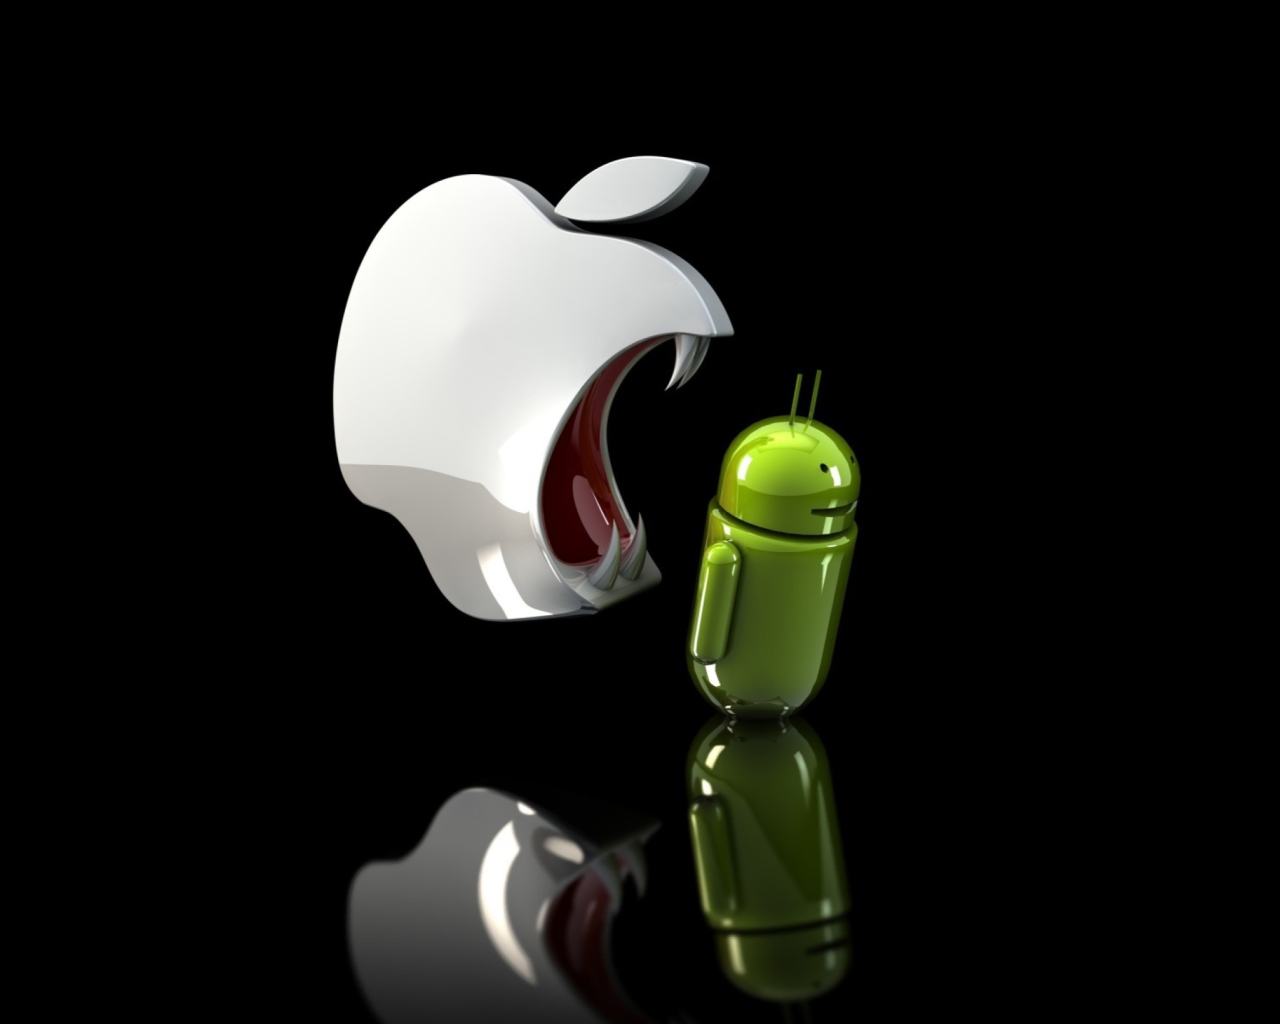 Das Apple Against Android Wallpaper 1280x1024